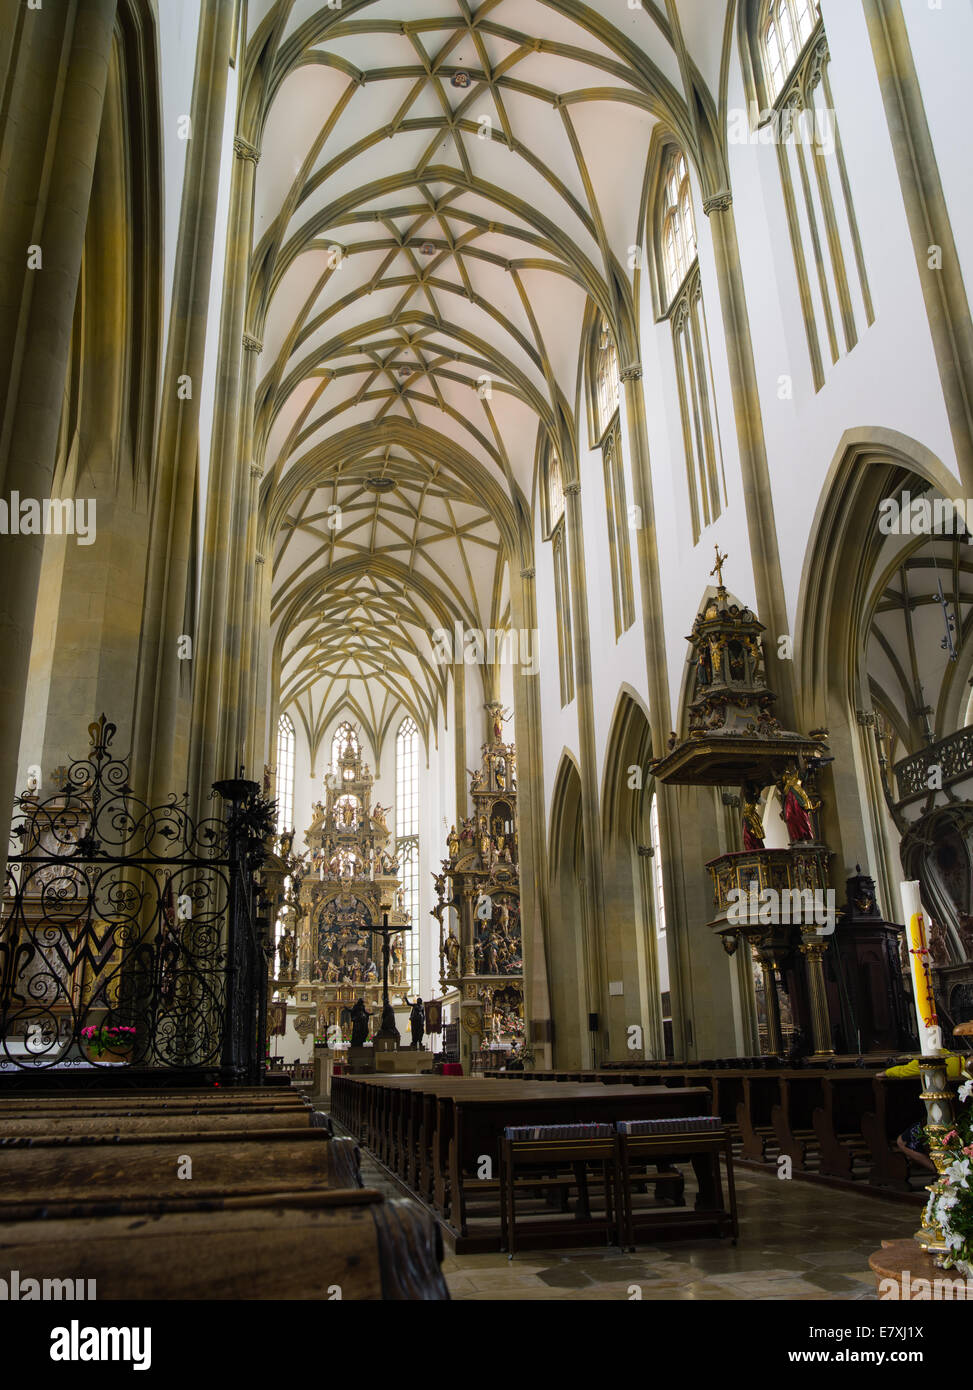 Interior view of the Basilica of St. Ulrich and St. Afra, Augsburg, Bavaria, Germany Stock Photo